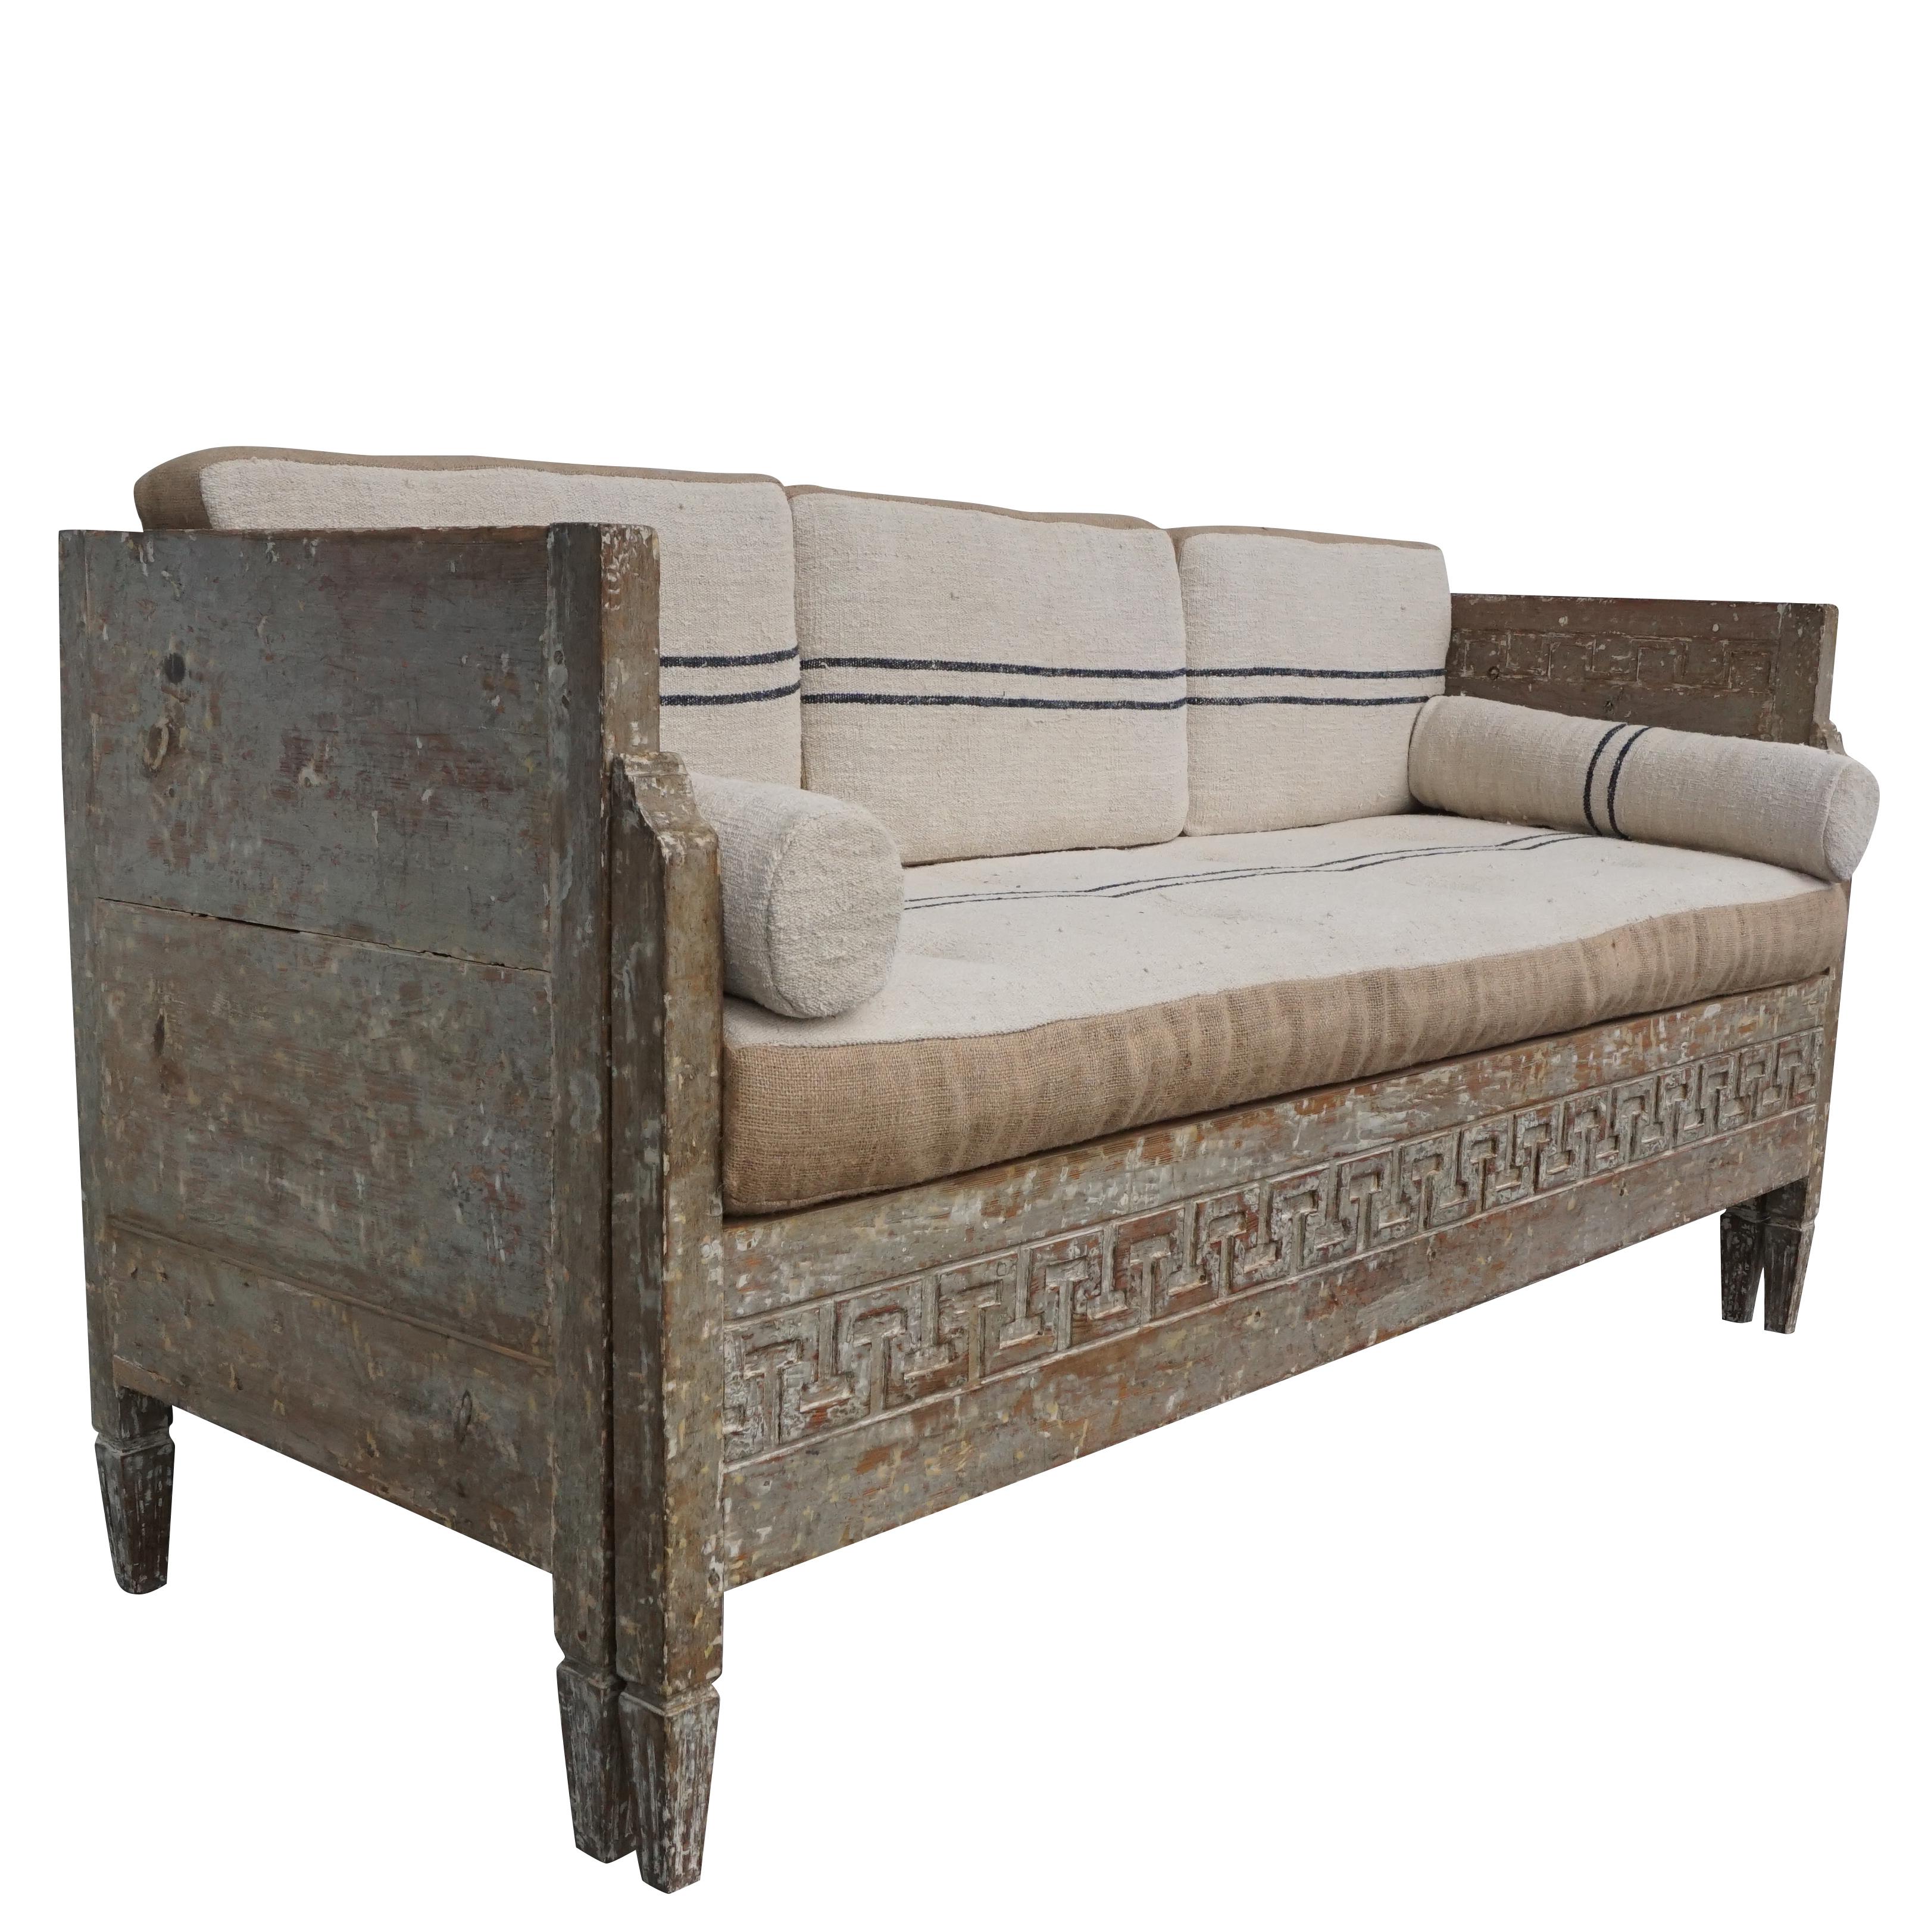 Hand-Carved 18th Century Lit Du Jour, Swedish Gustavian Pinewood Day Bed, Antique Wood Sofa